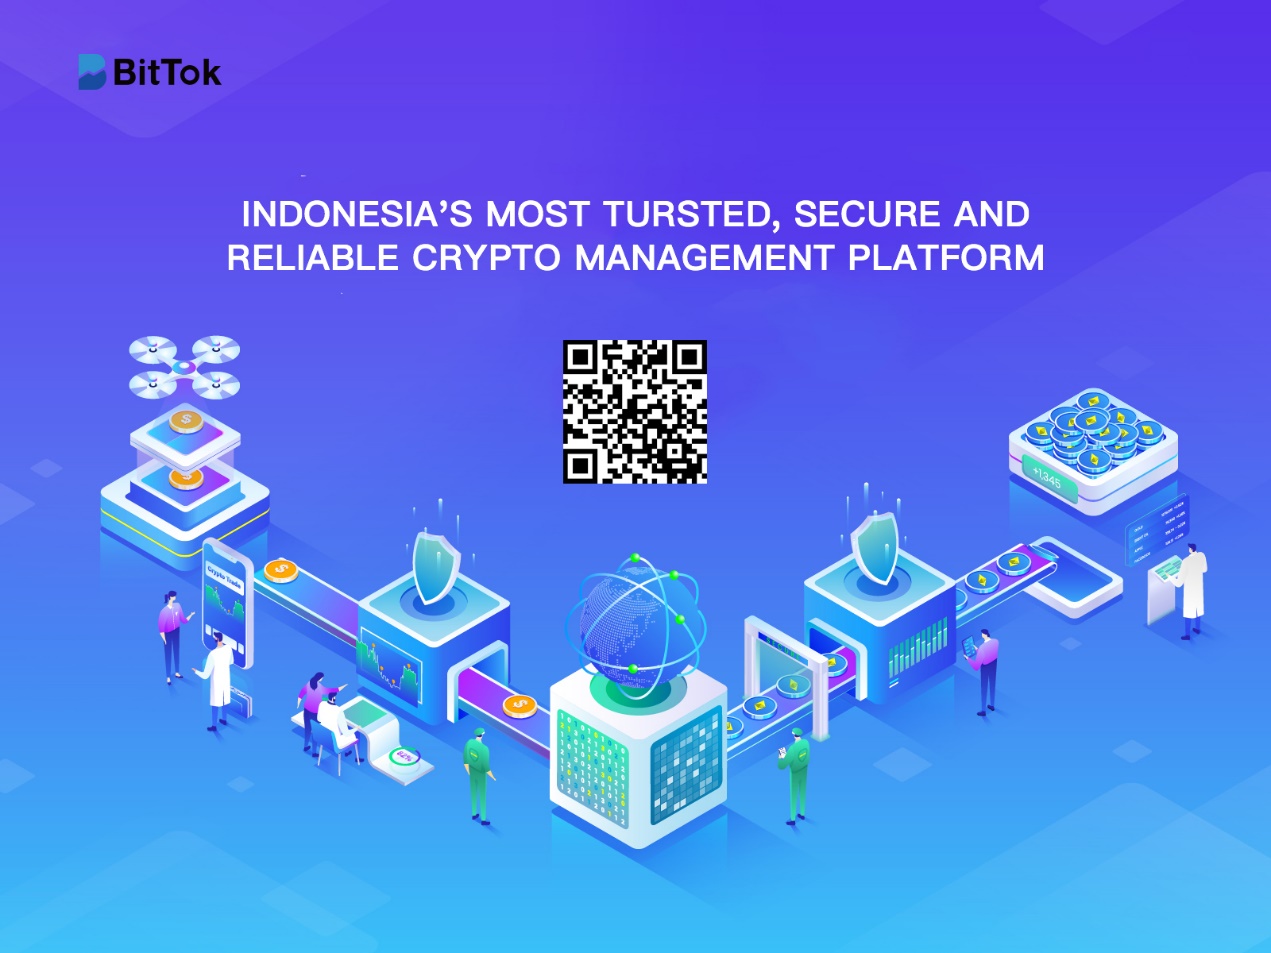 BitTok, Thursday, August 15, 2019, Press release picture